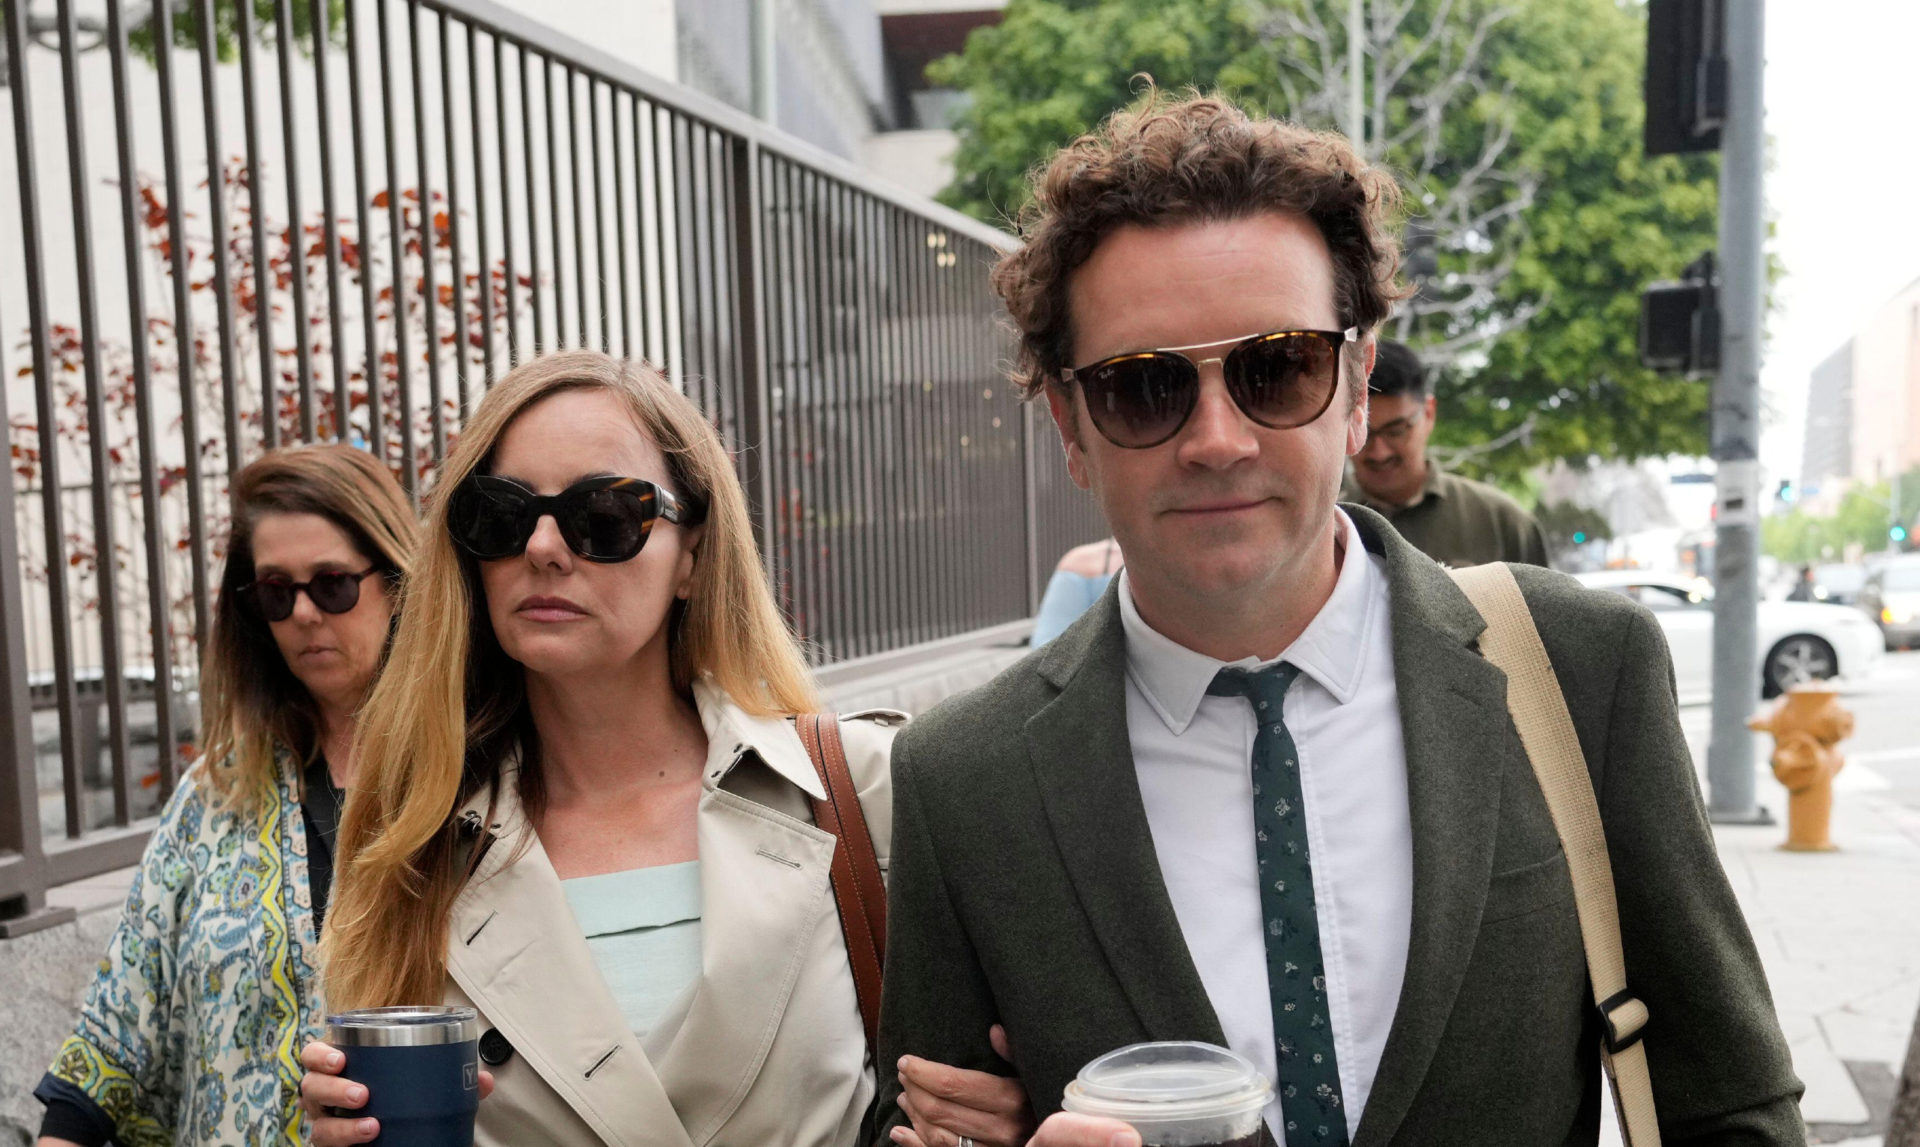 Danny Masterson and his wife Bijou Phillips arrive for closing arguments in his second trial in Los Angeles